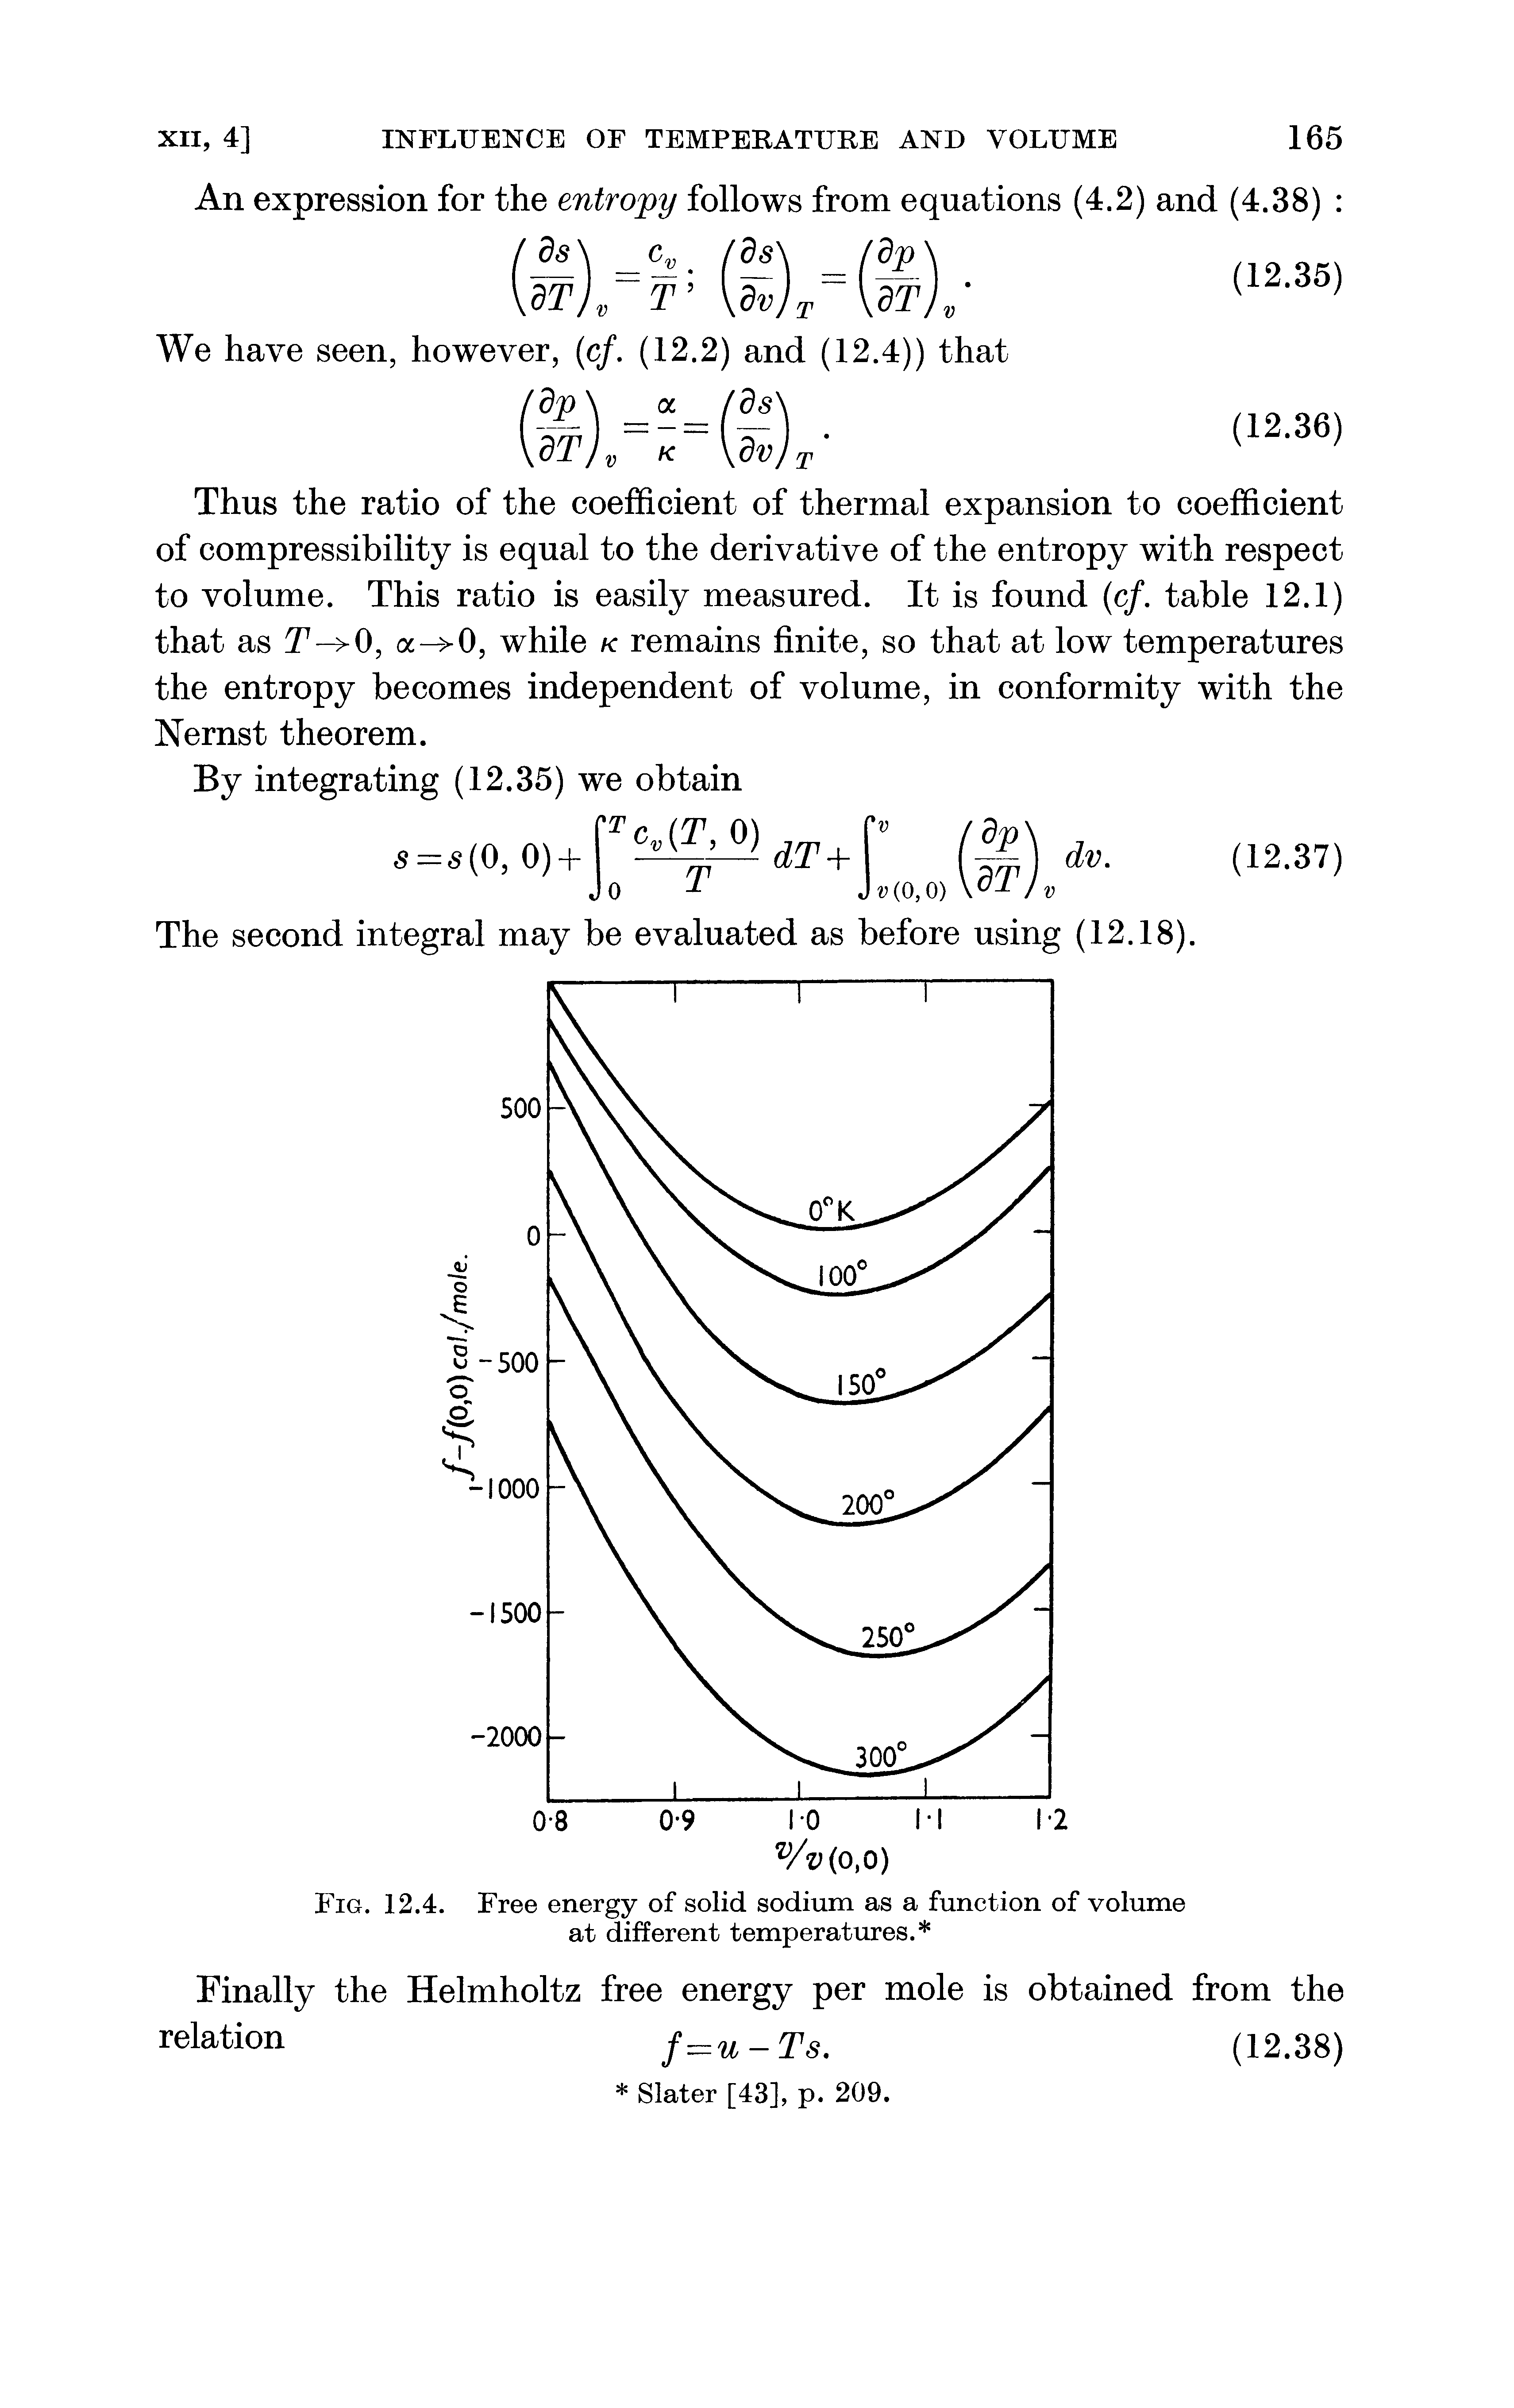 Fig. 12.4. Free energy of solid sodium as a function of volume at different temperatures. ...